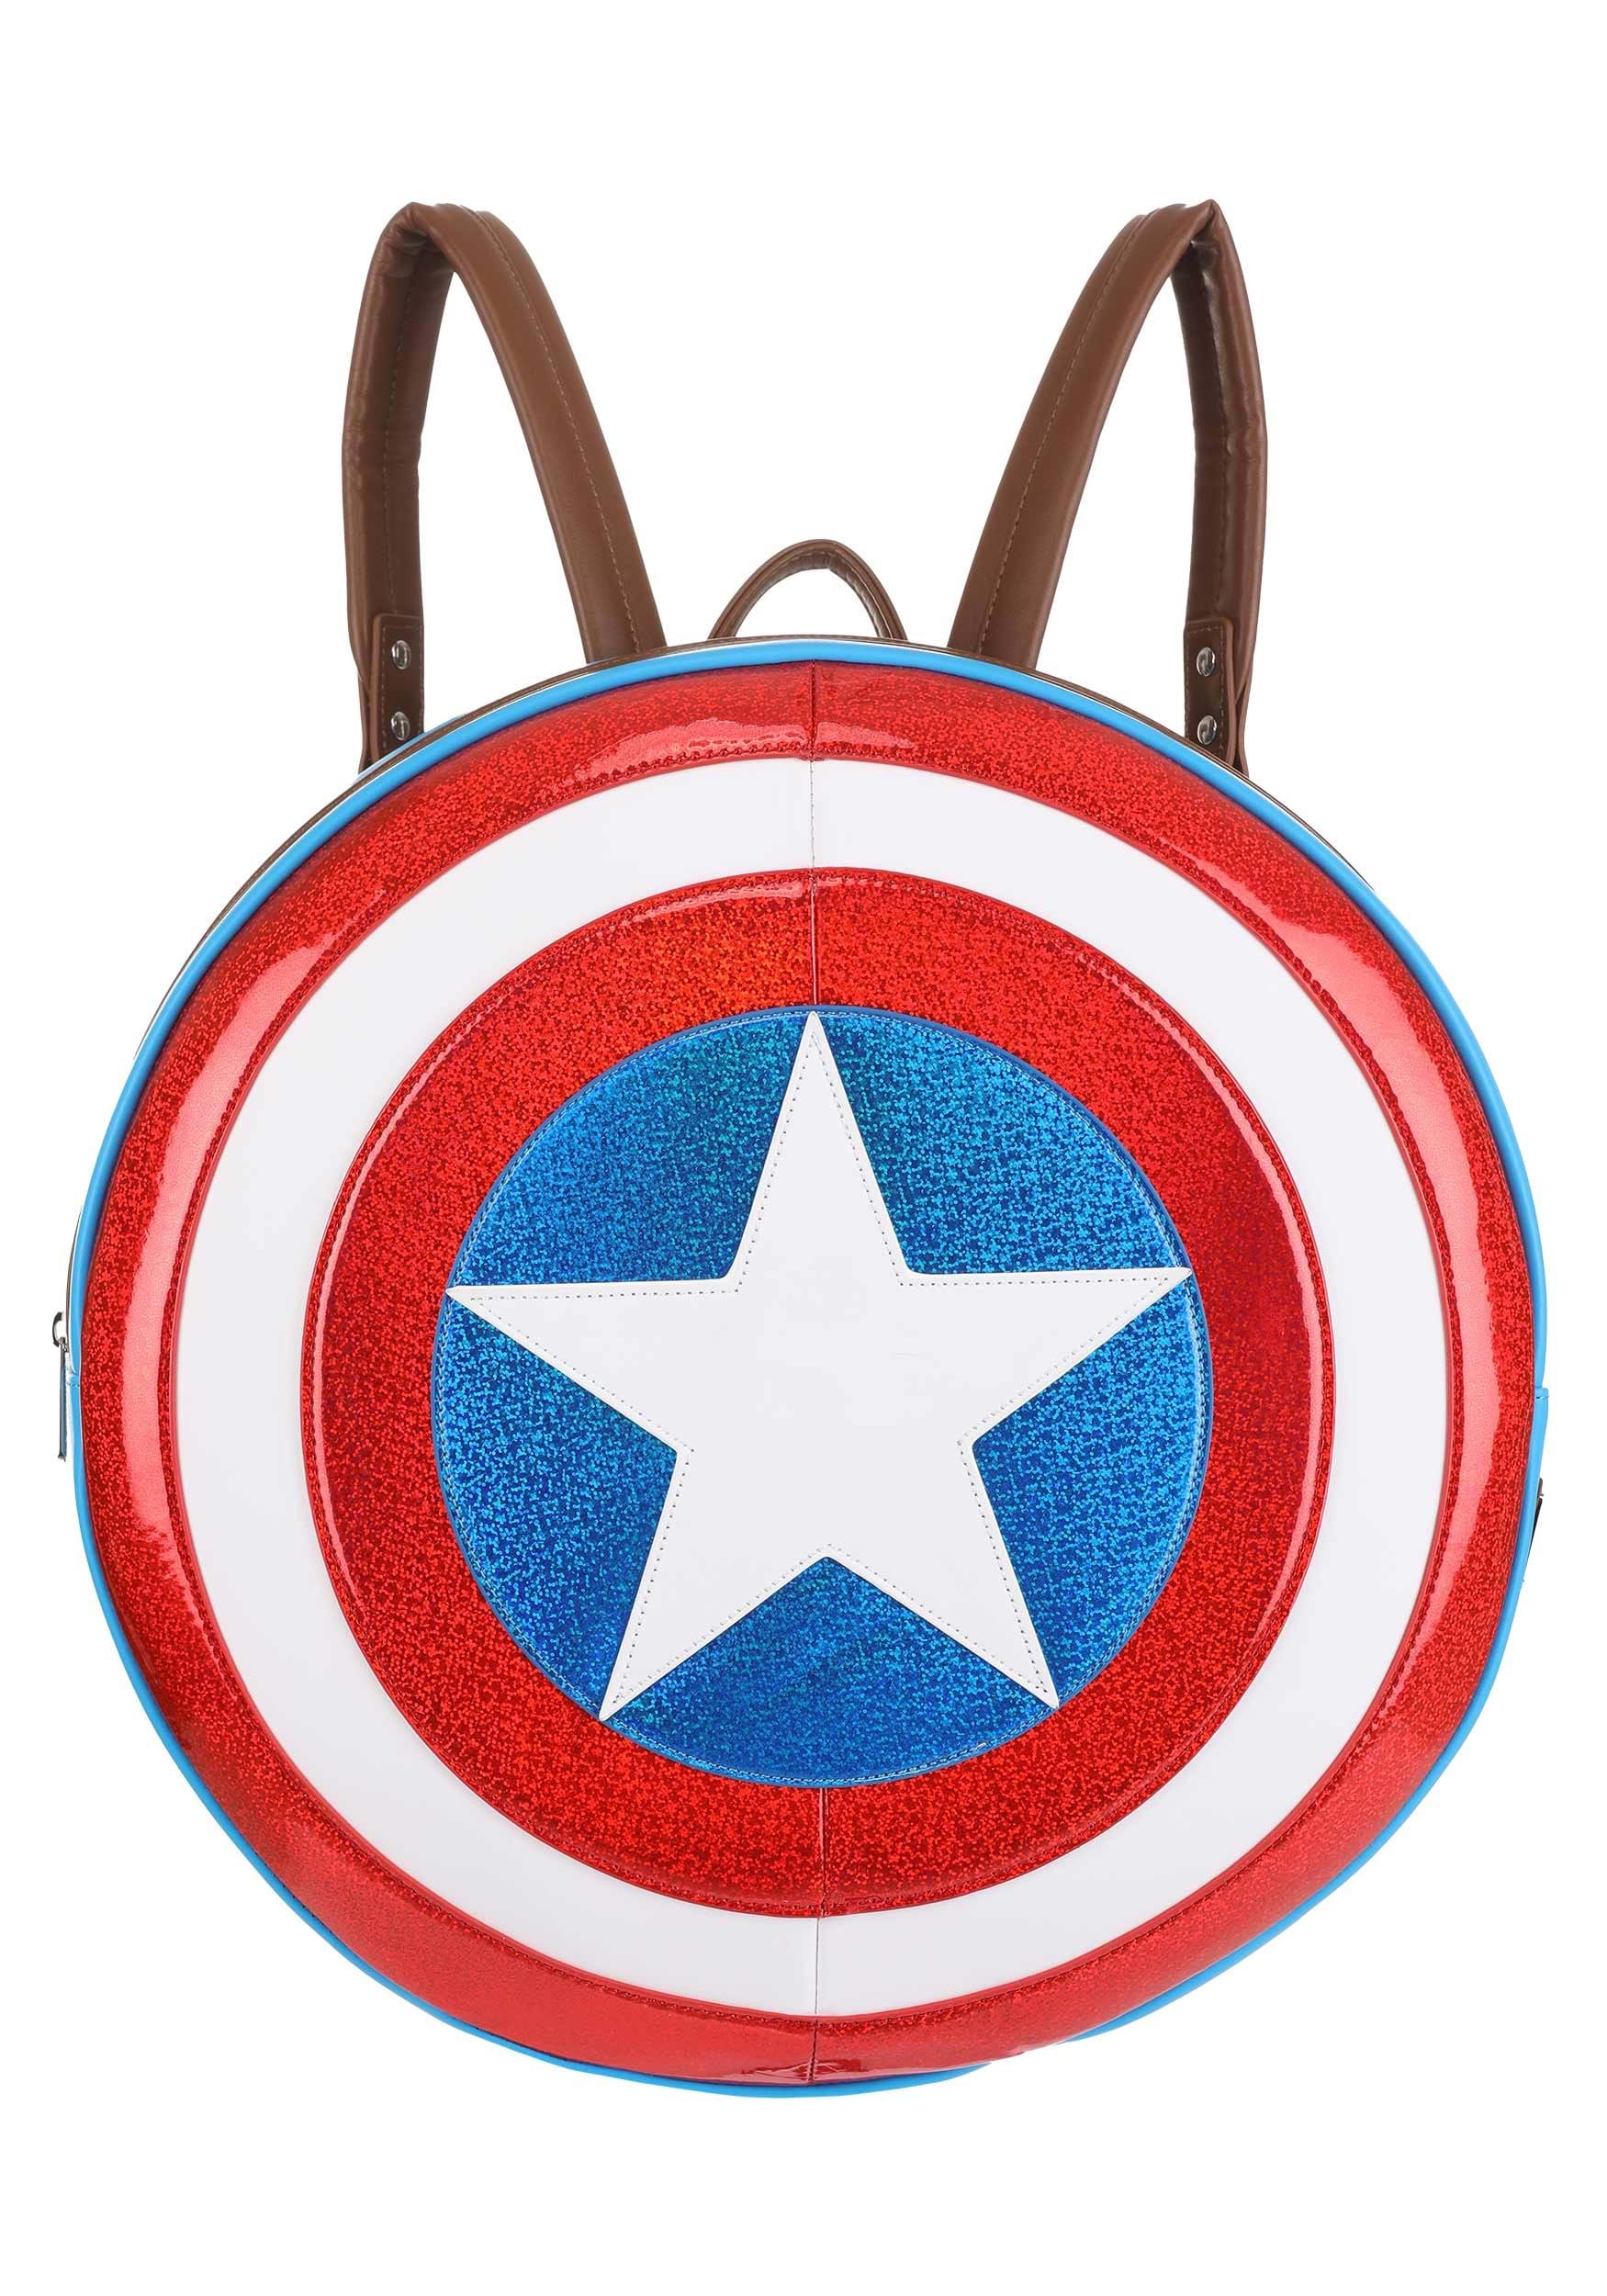 Image of Loungefly Loungefly Captain America Shield Backpack by Loungefly